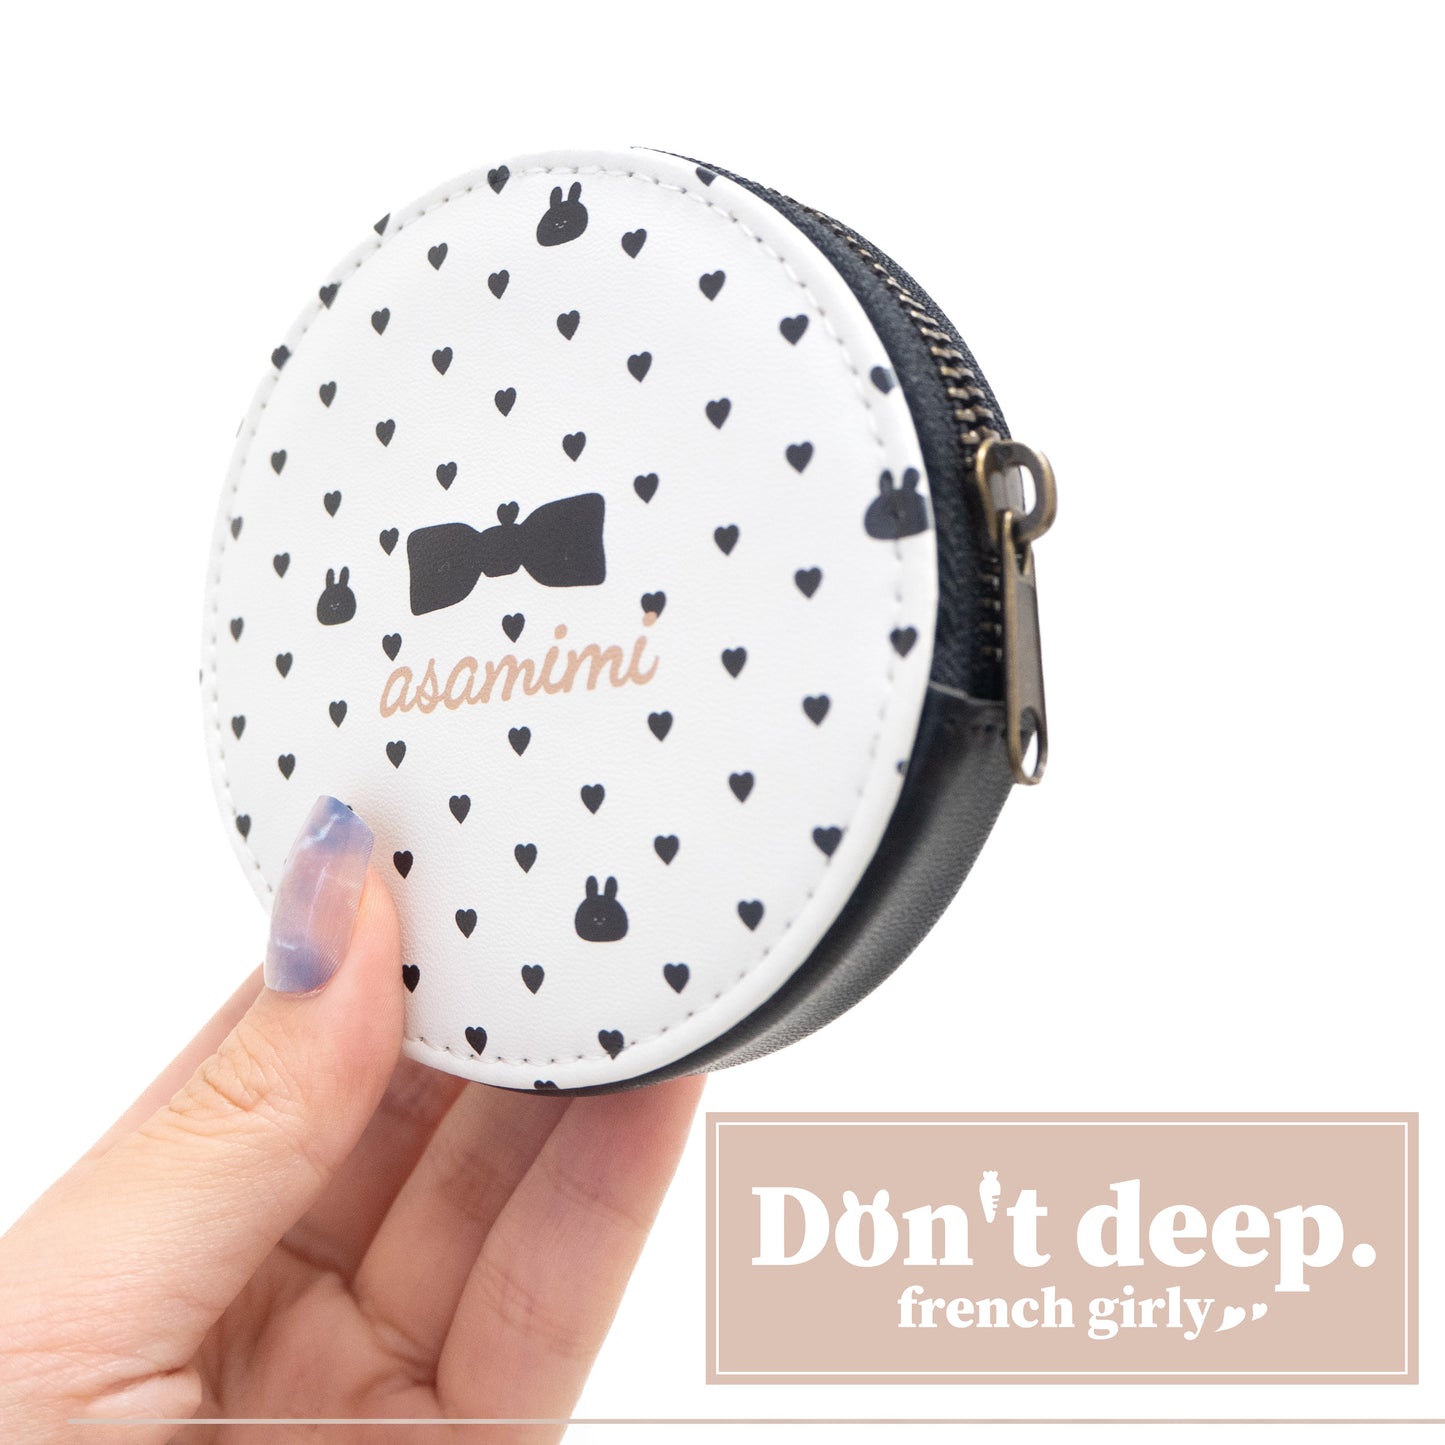 [Asamimi-chan] Synthetic leather round coin case (French girly)